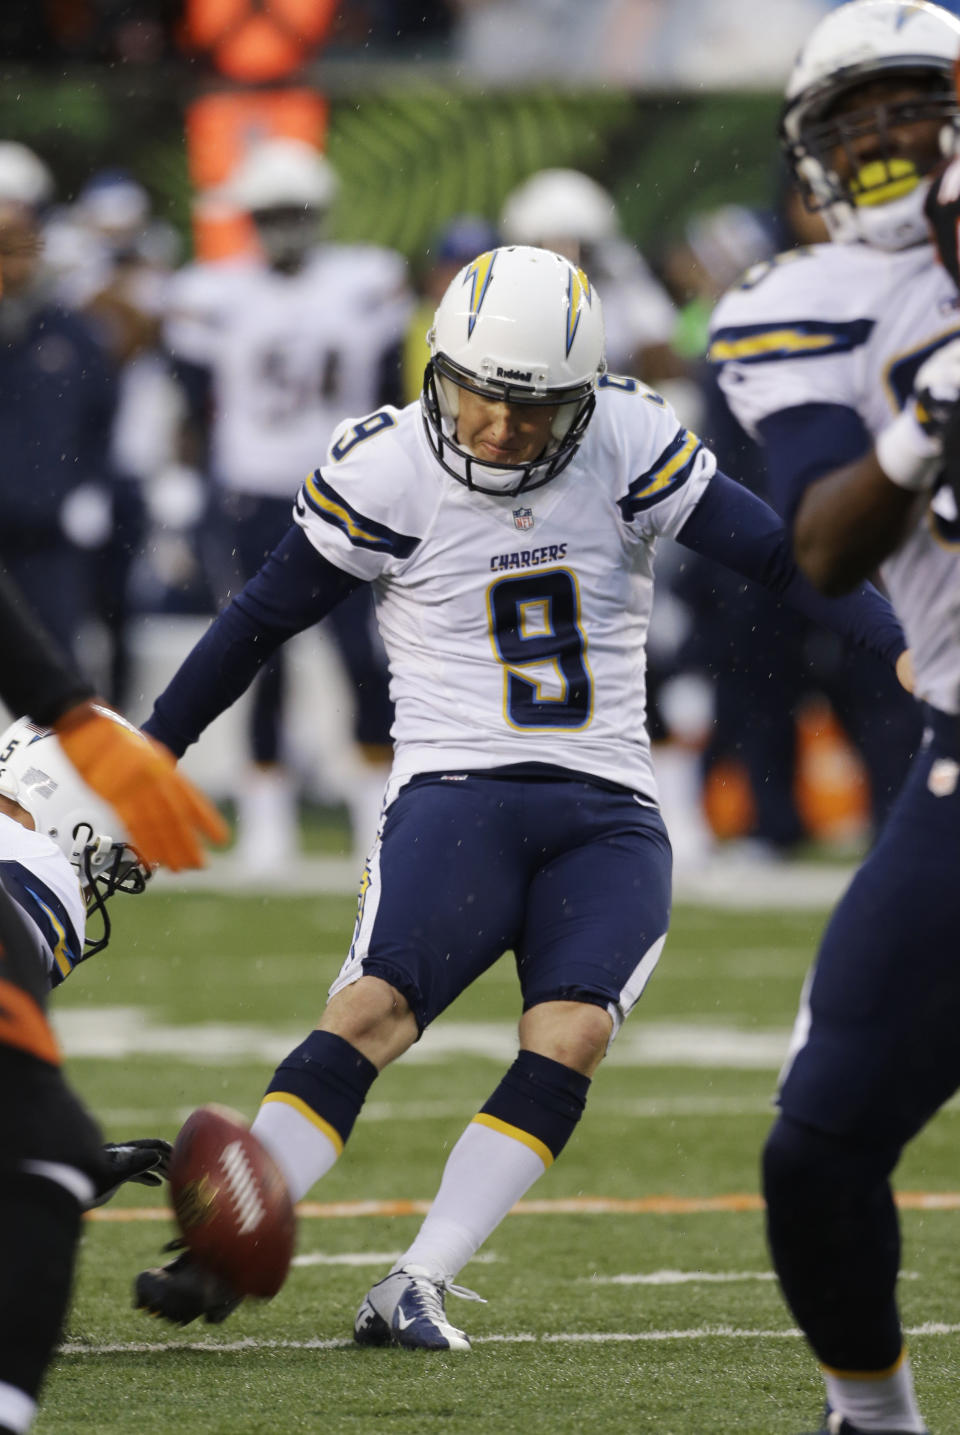 San Diego Chargers place kicker Nick Novak (9) boots a 25-yard field goal against the Cincinnati Bengals in the second half of an NFL wild-card playoff football game on Sunday, Jan. 5, 2014, in Cincinnati. (AP Photo/David Kohl)